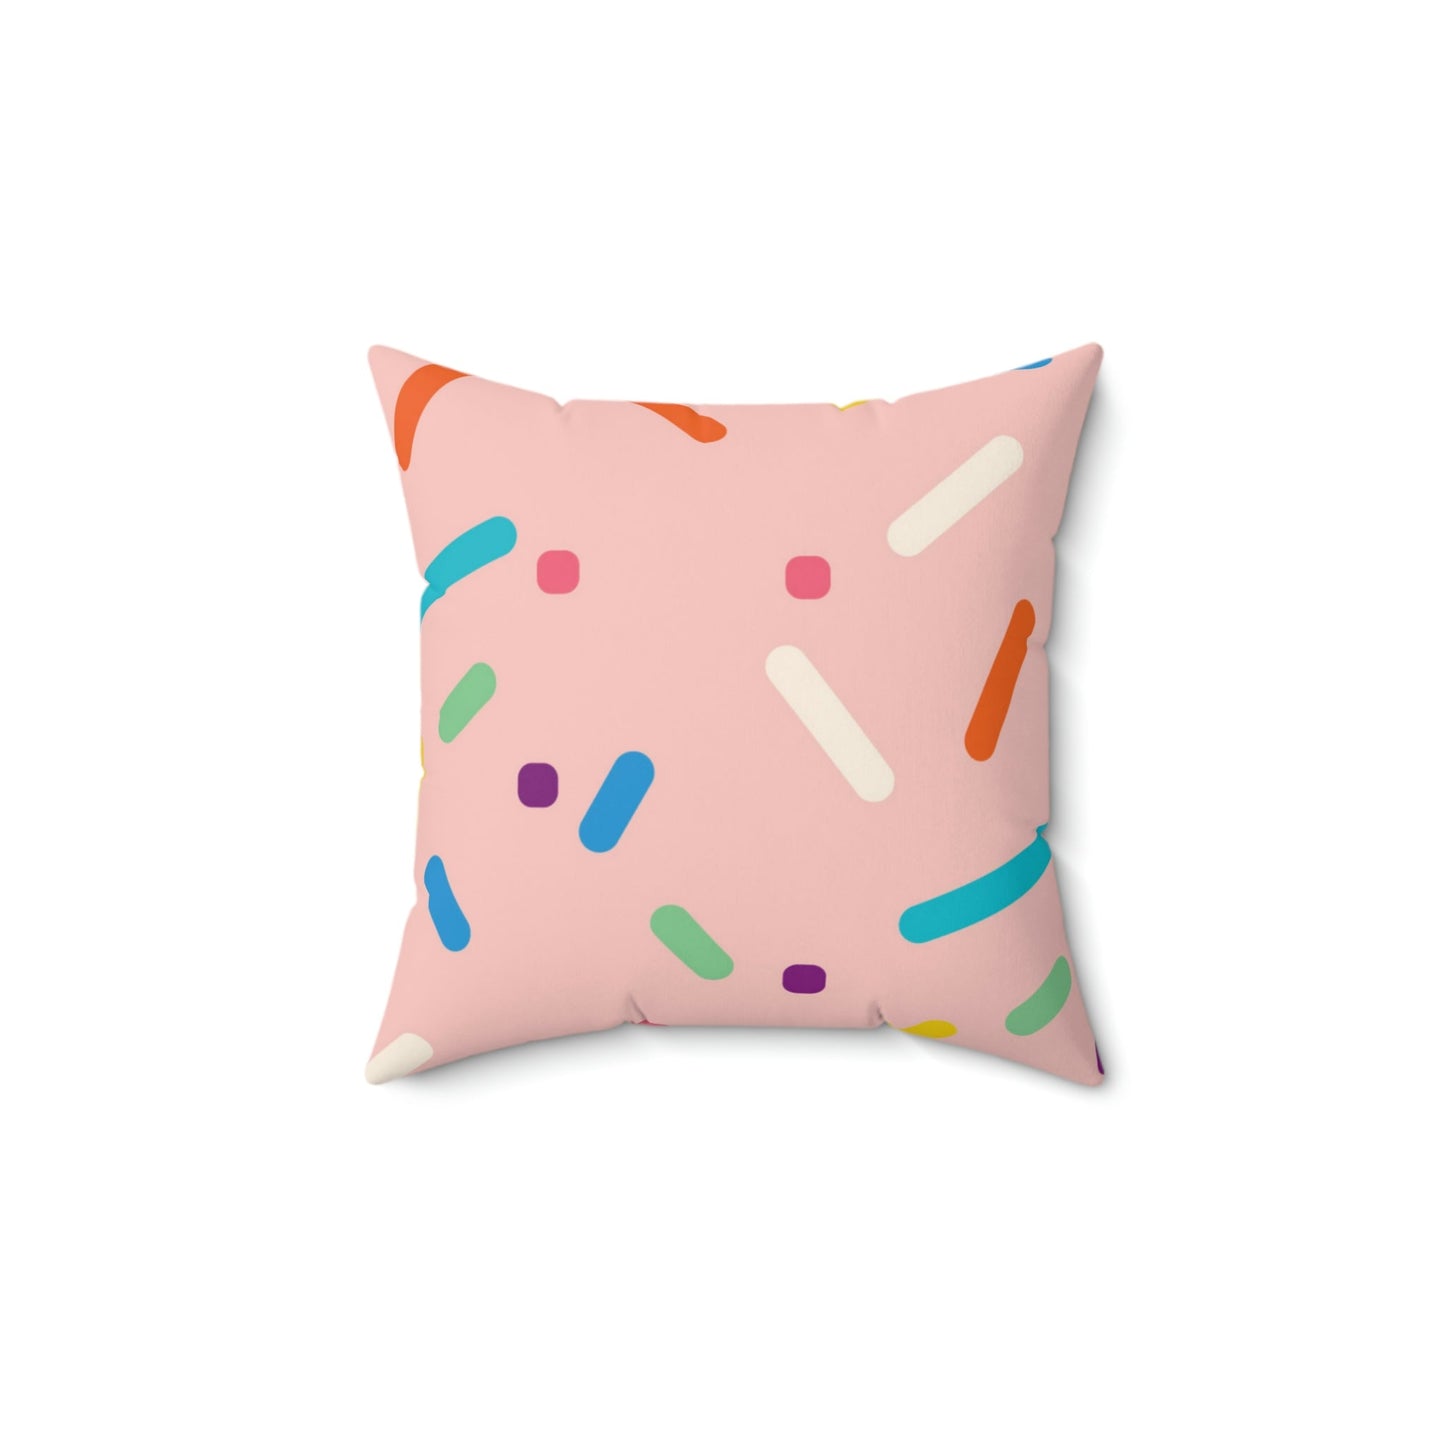 Strawberry Birthday Cake Square Pillow Home Decor Pink Sweetheart